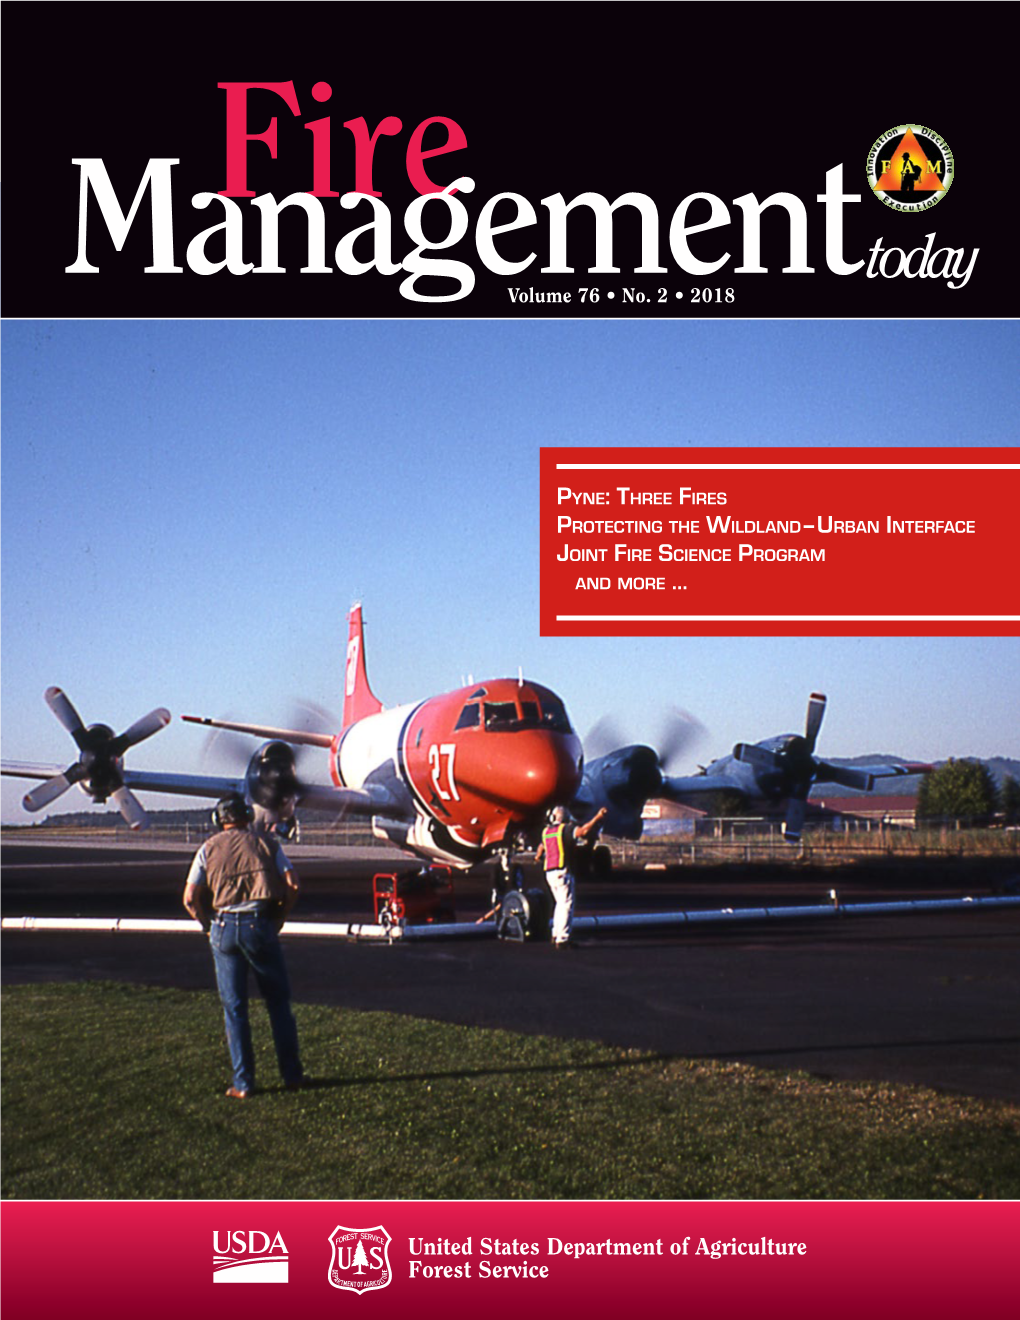 Fire Management Today Is Published by the Forest Service, an Agency in the U.S